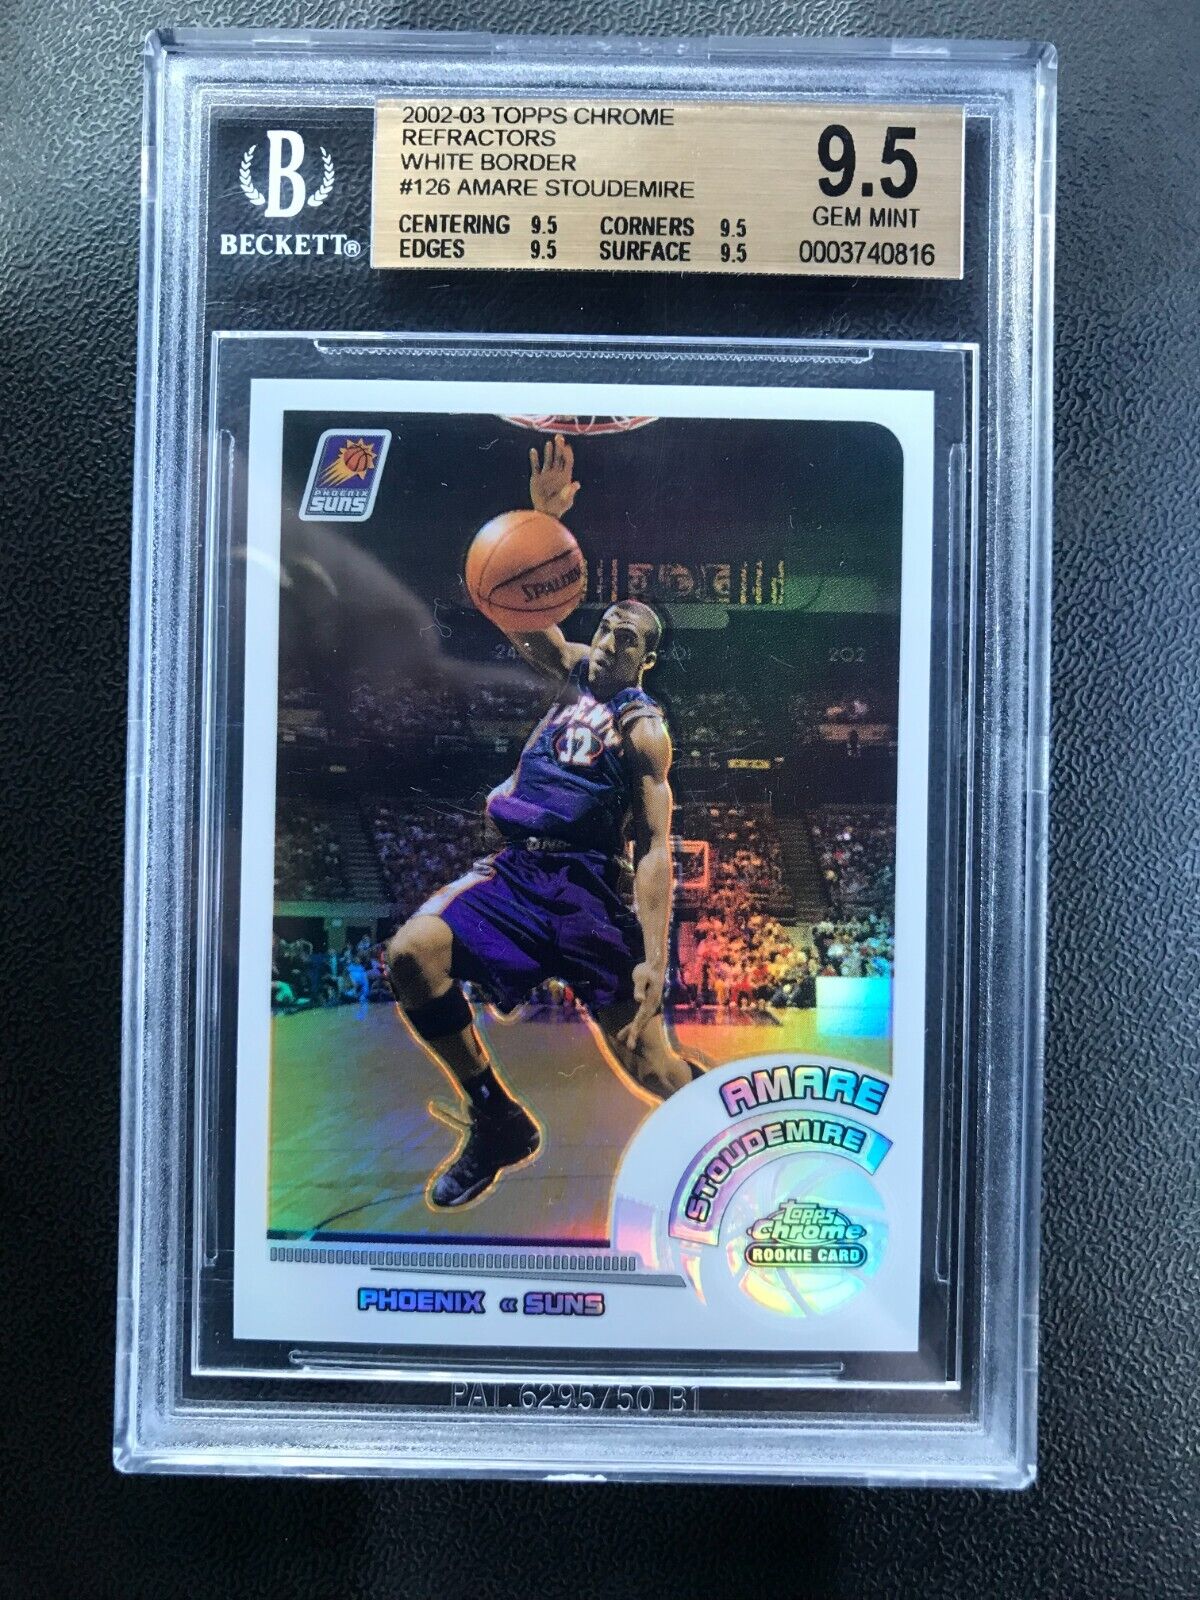 Amare Stoudemire 2002-03 Topps Chrome #126 Rookie White Refractor /249 BGS 9.5